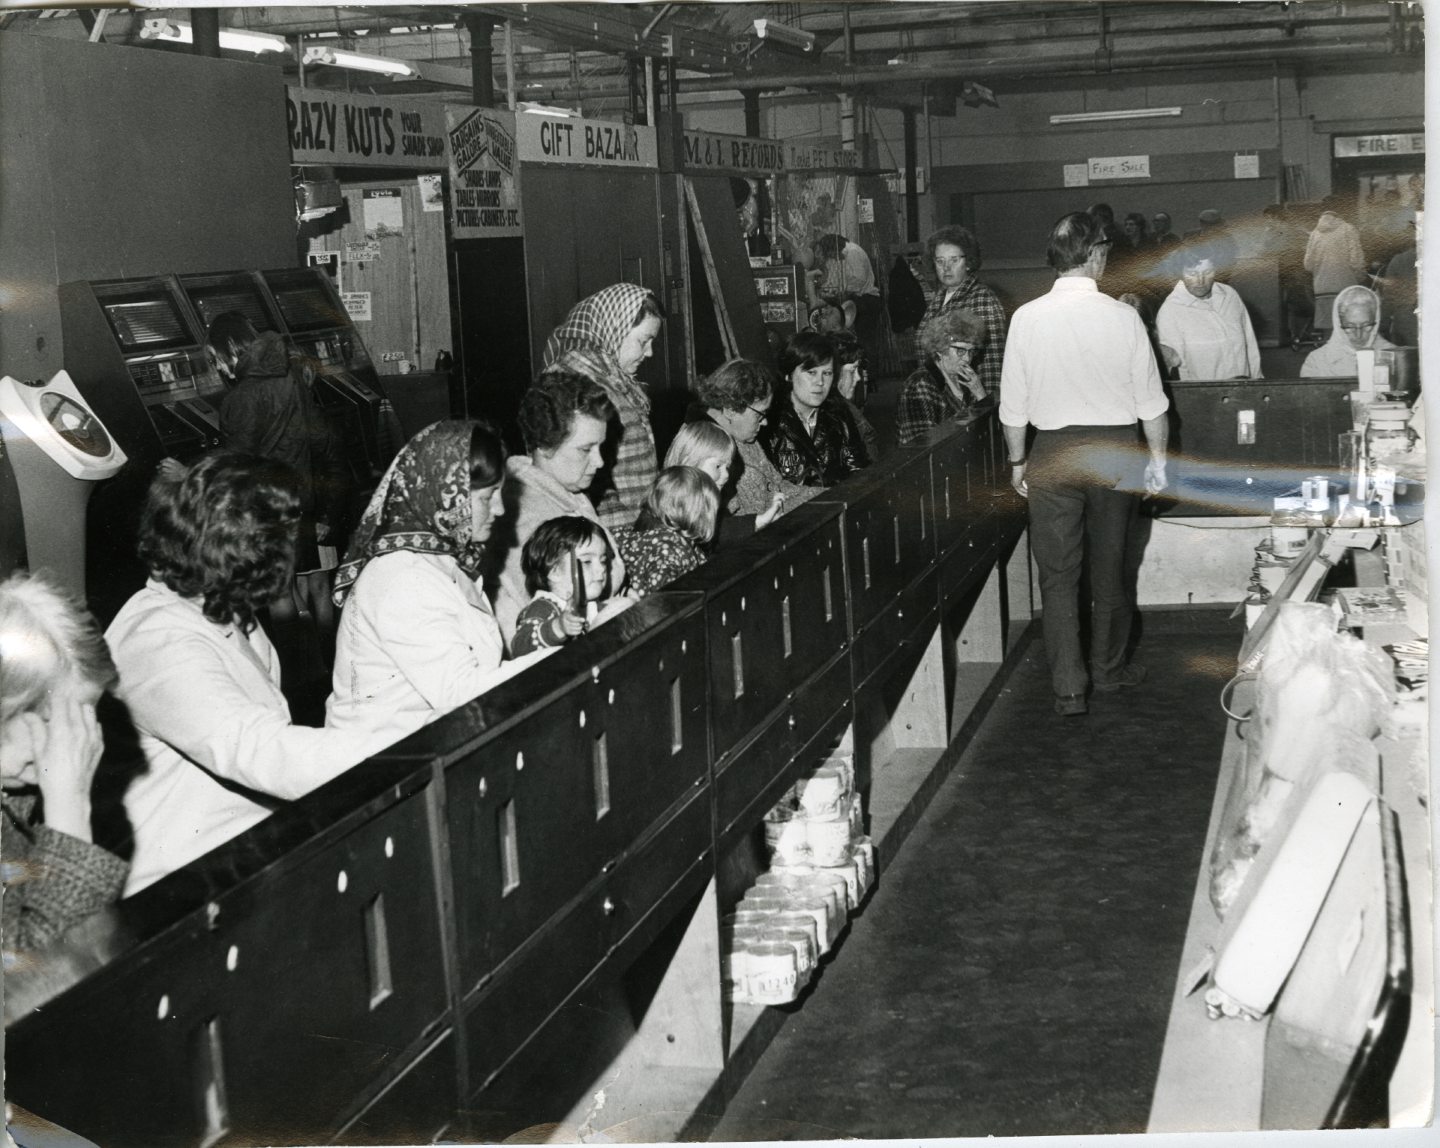 A busy scene at the bingo stand in Dens Road Market in 1972.